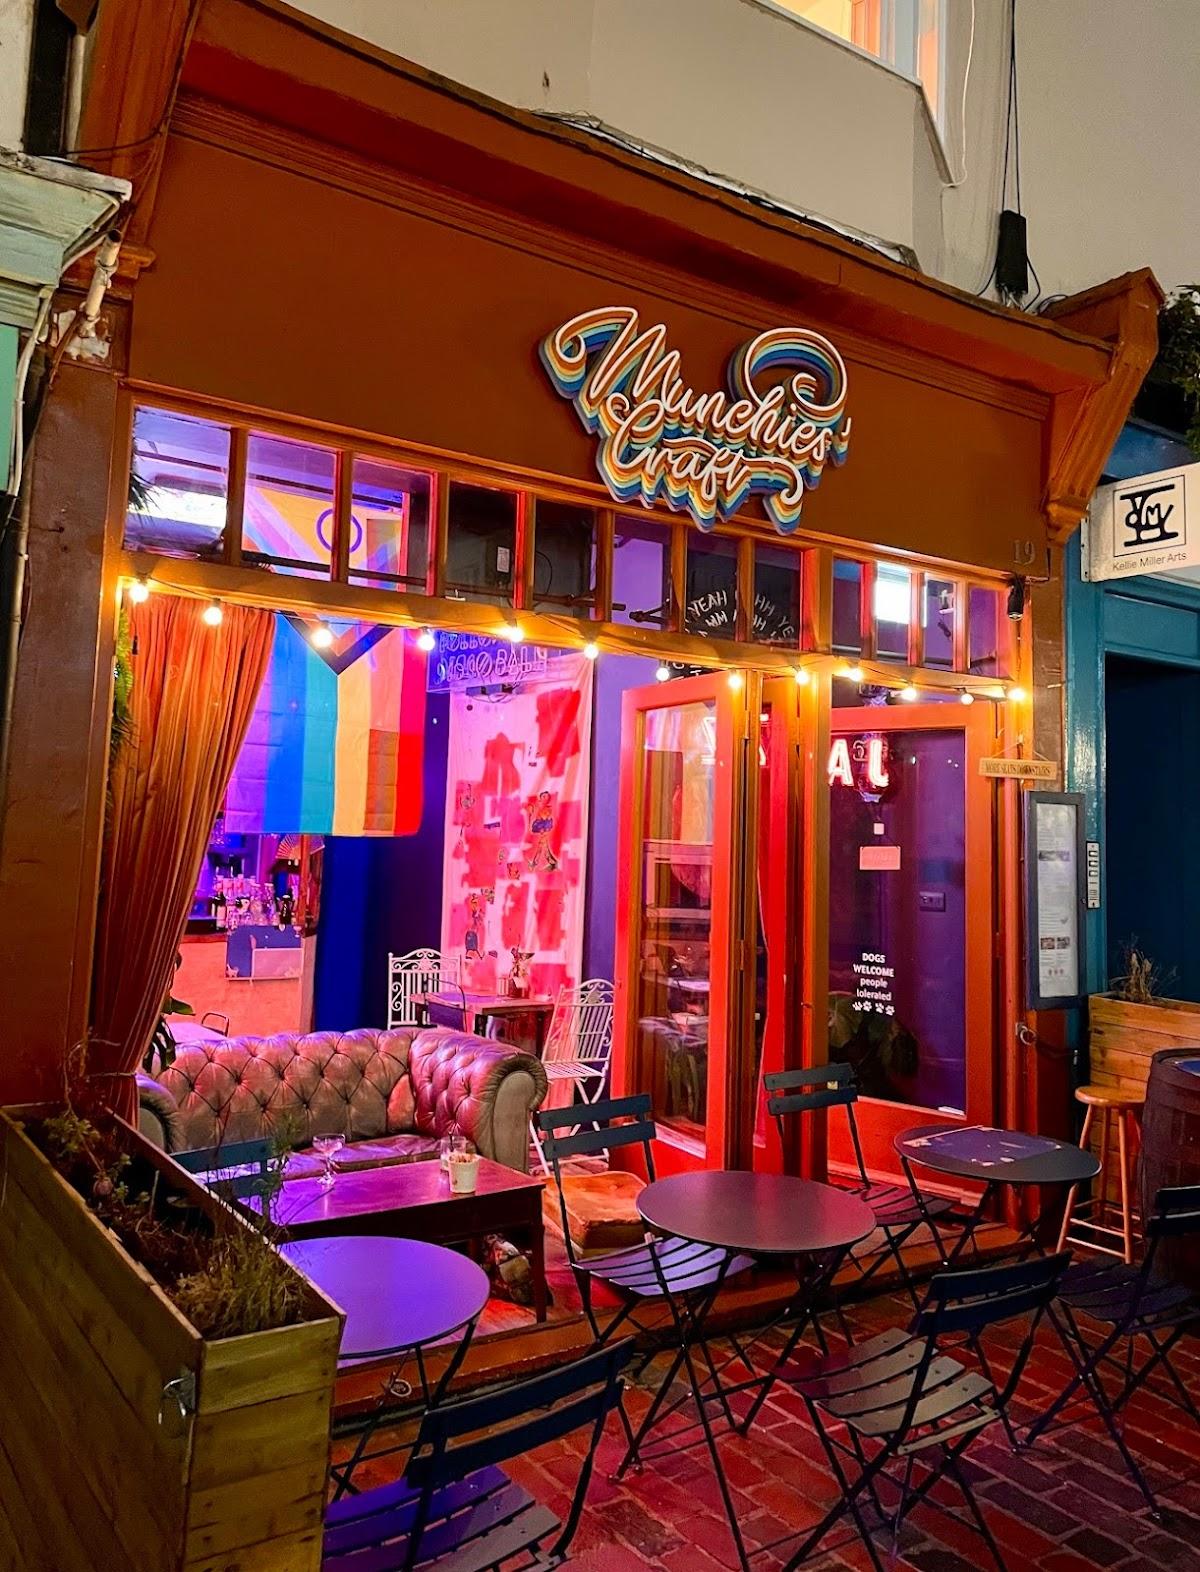 Outside view of a cafe with seats outside, neon lights and a pride flag